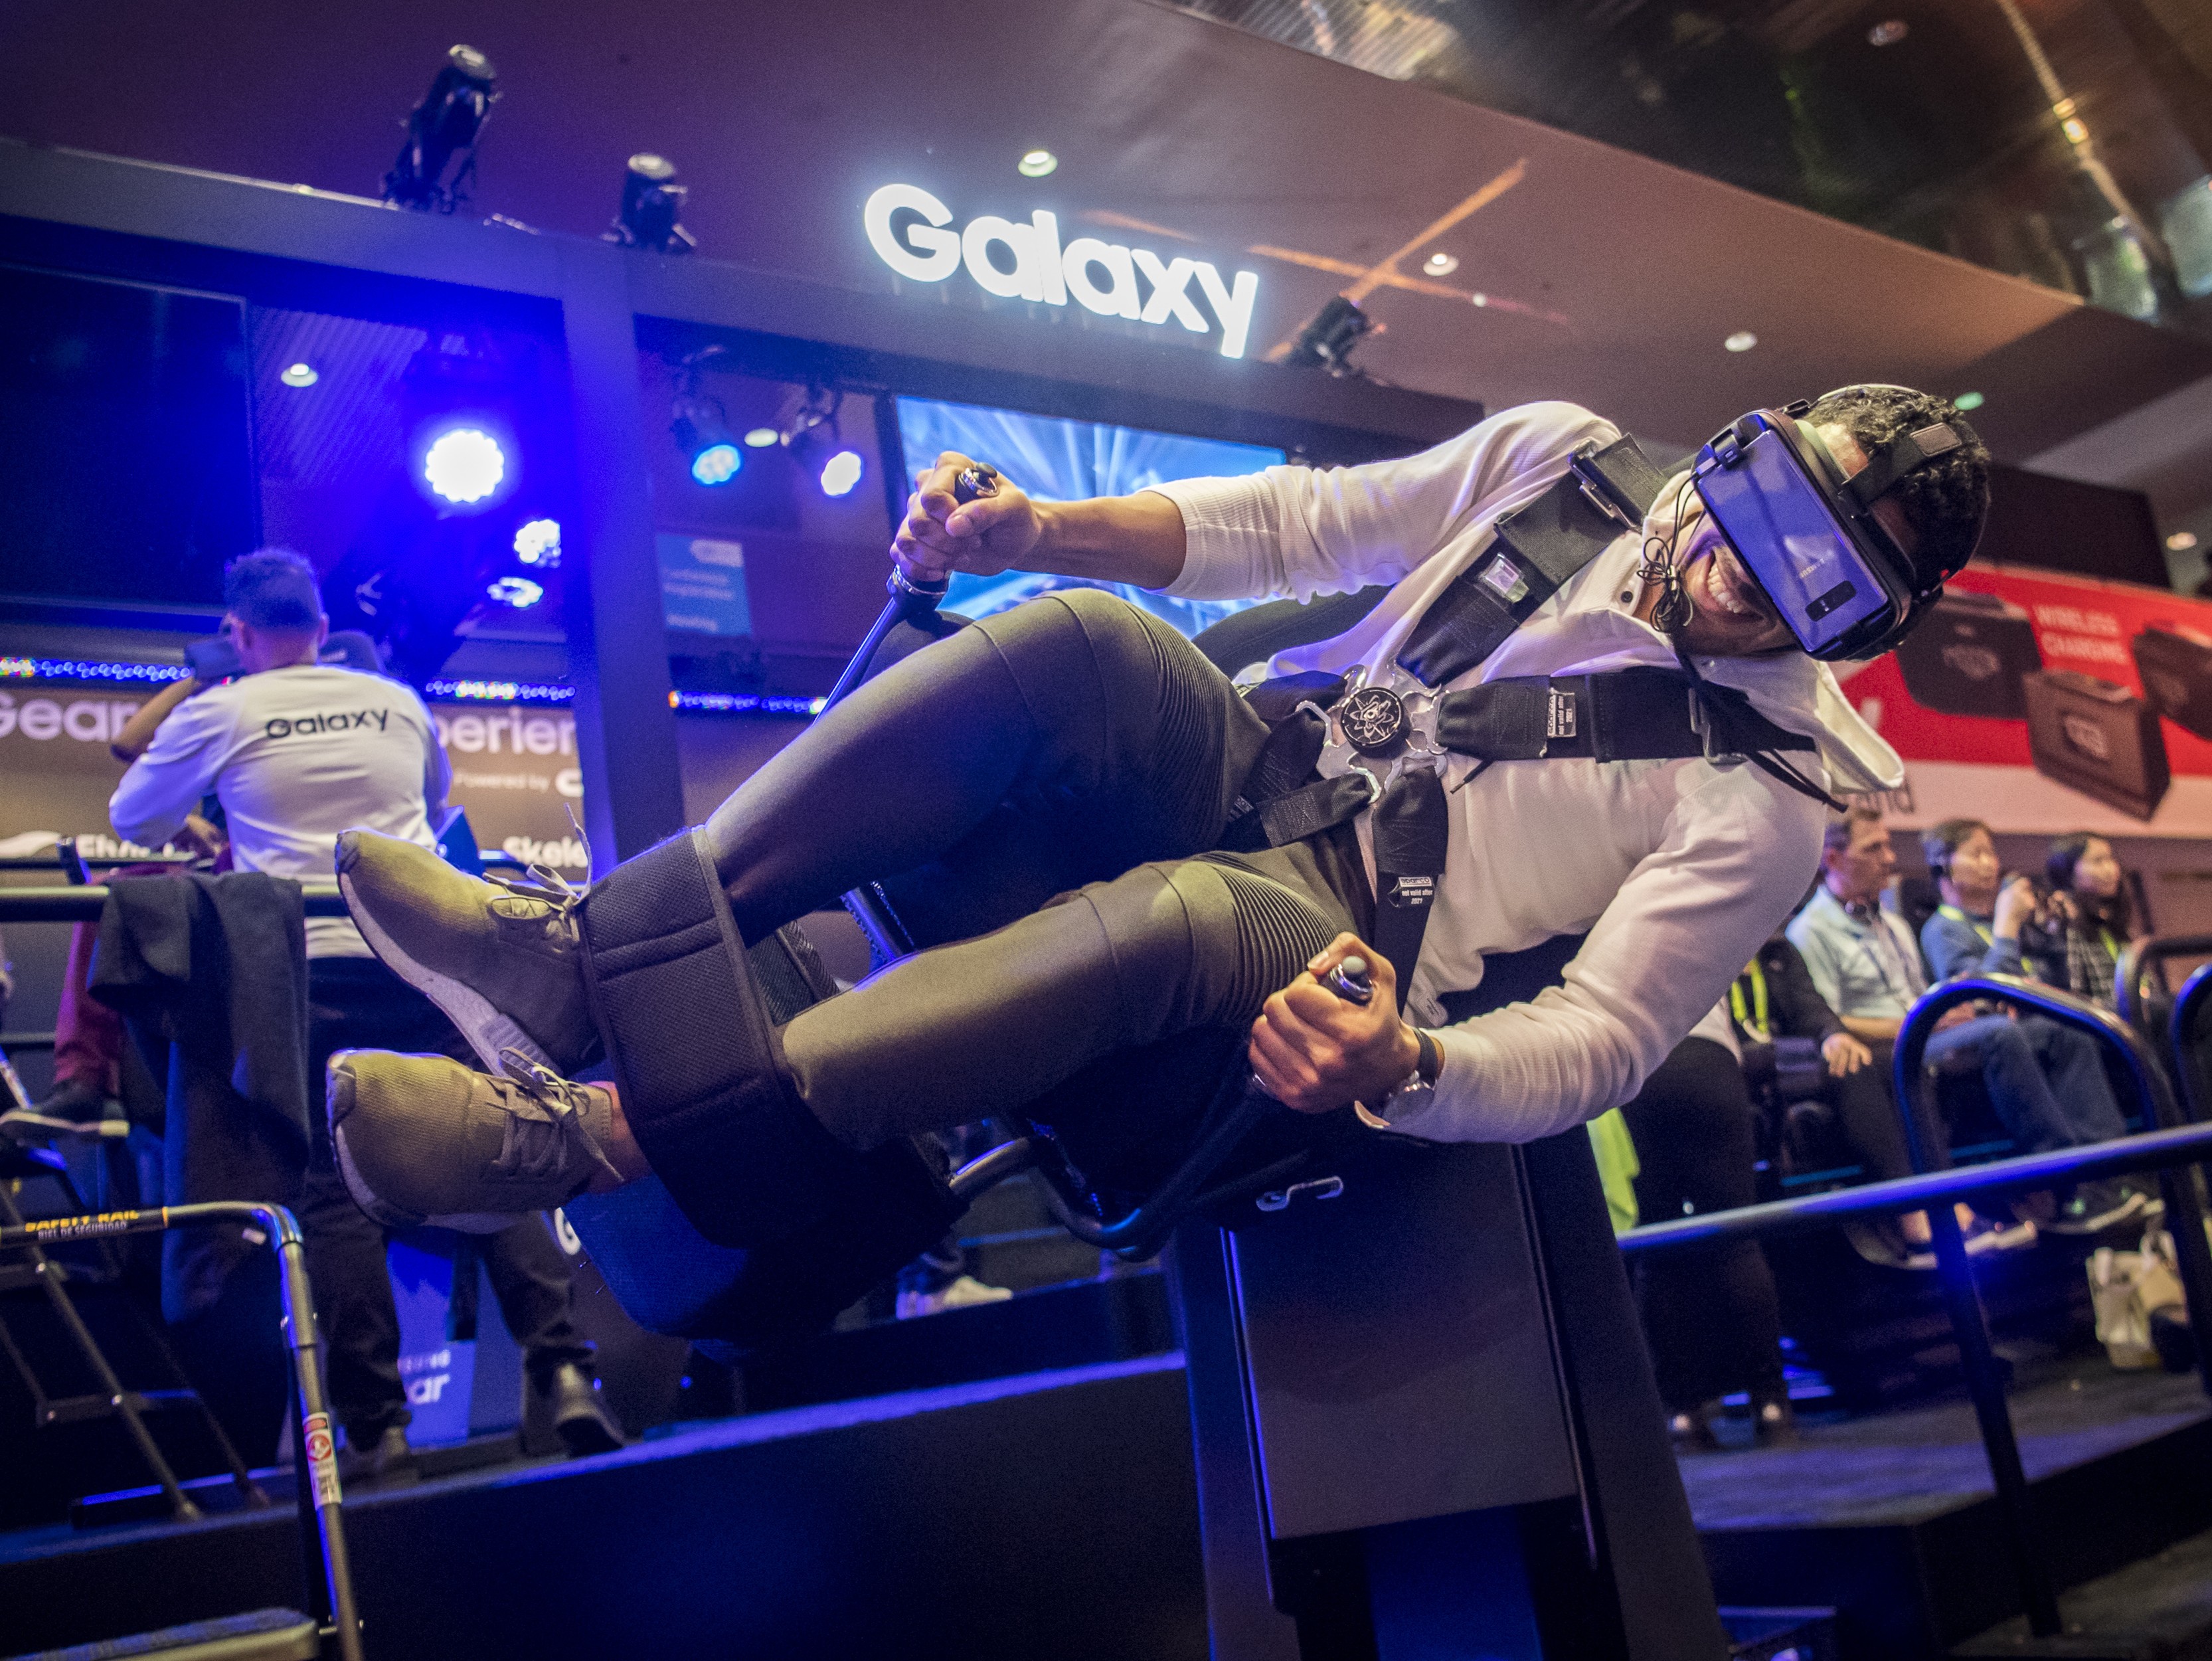 An attendee wearing a Samsung virtual reality headset rides the Flying Dino simulator during the 2018 Consumer Electronics Show in Las Vegas on January 10. Electric and driverless cars were a major part of this year's CES, as makers of hi-tech cameras, batteries and AI software vie to climb into automakers' dashboards. Photo: Bloomberg